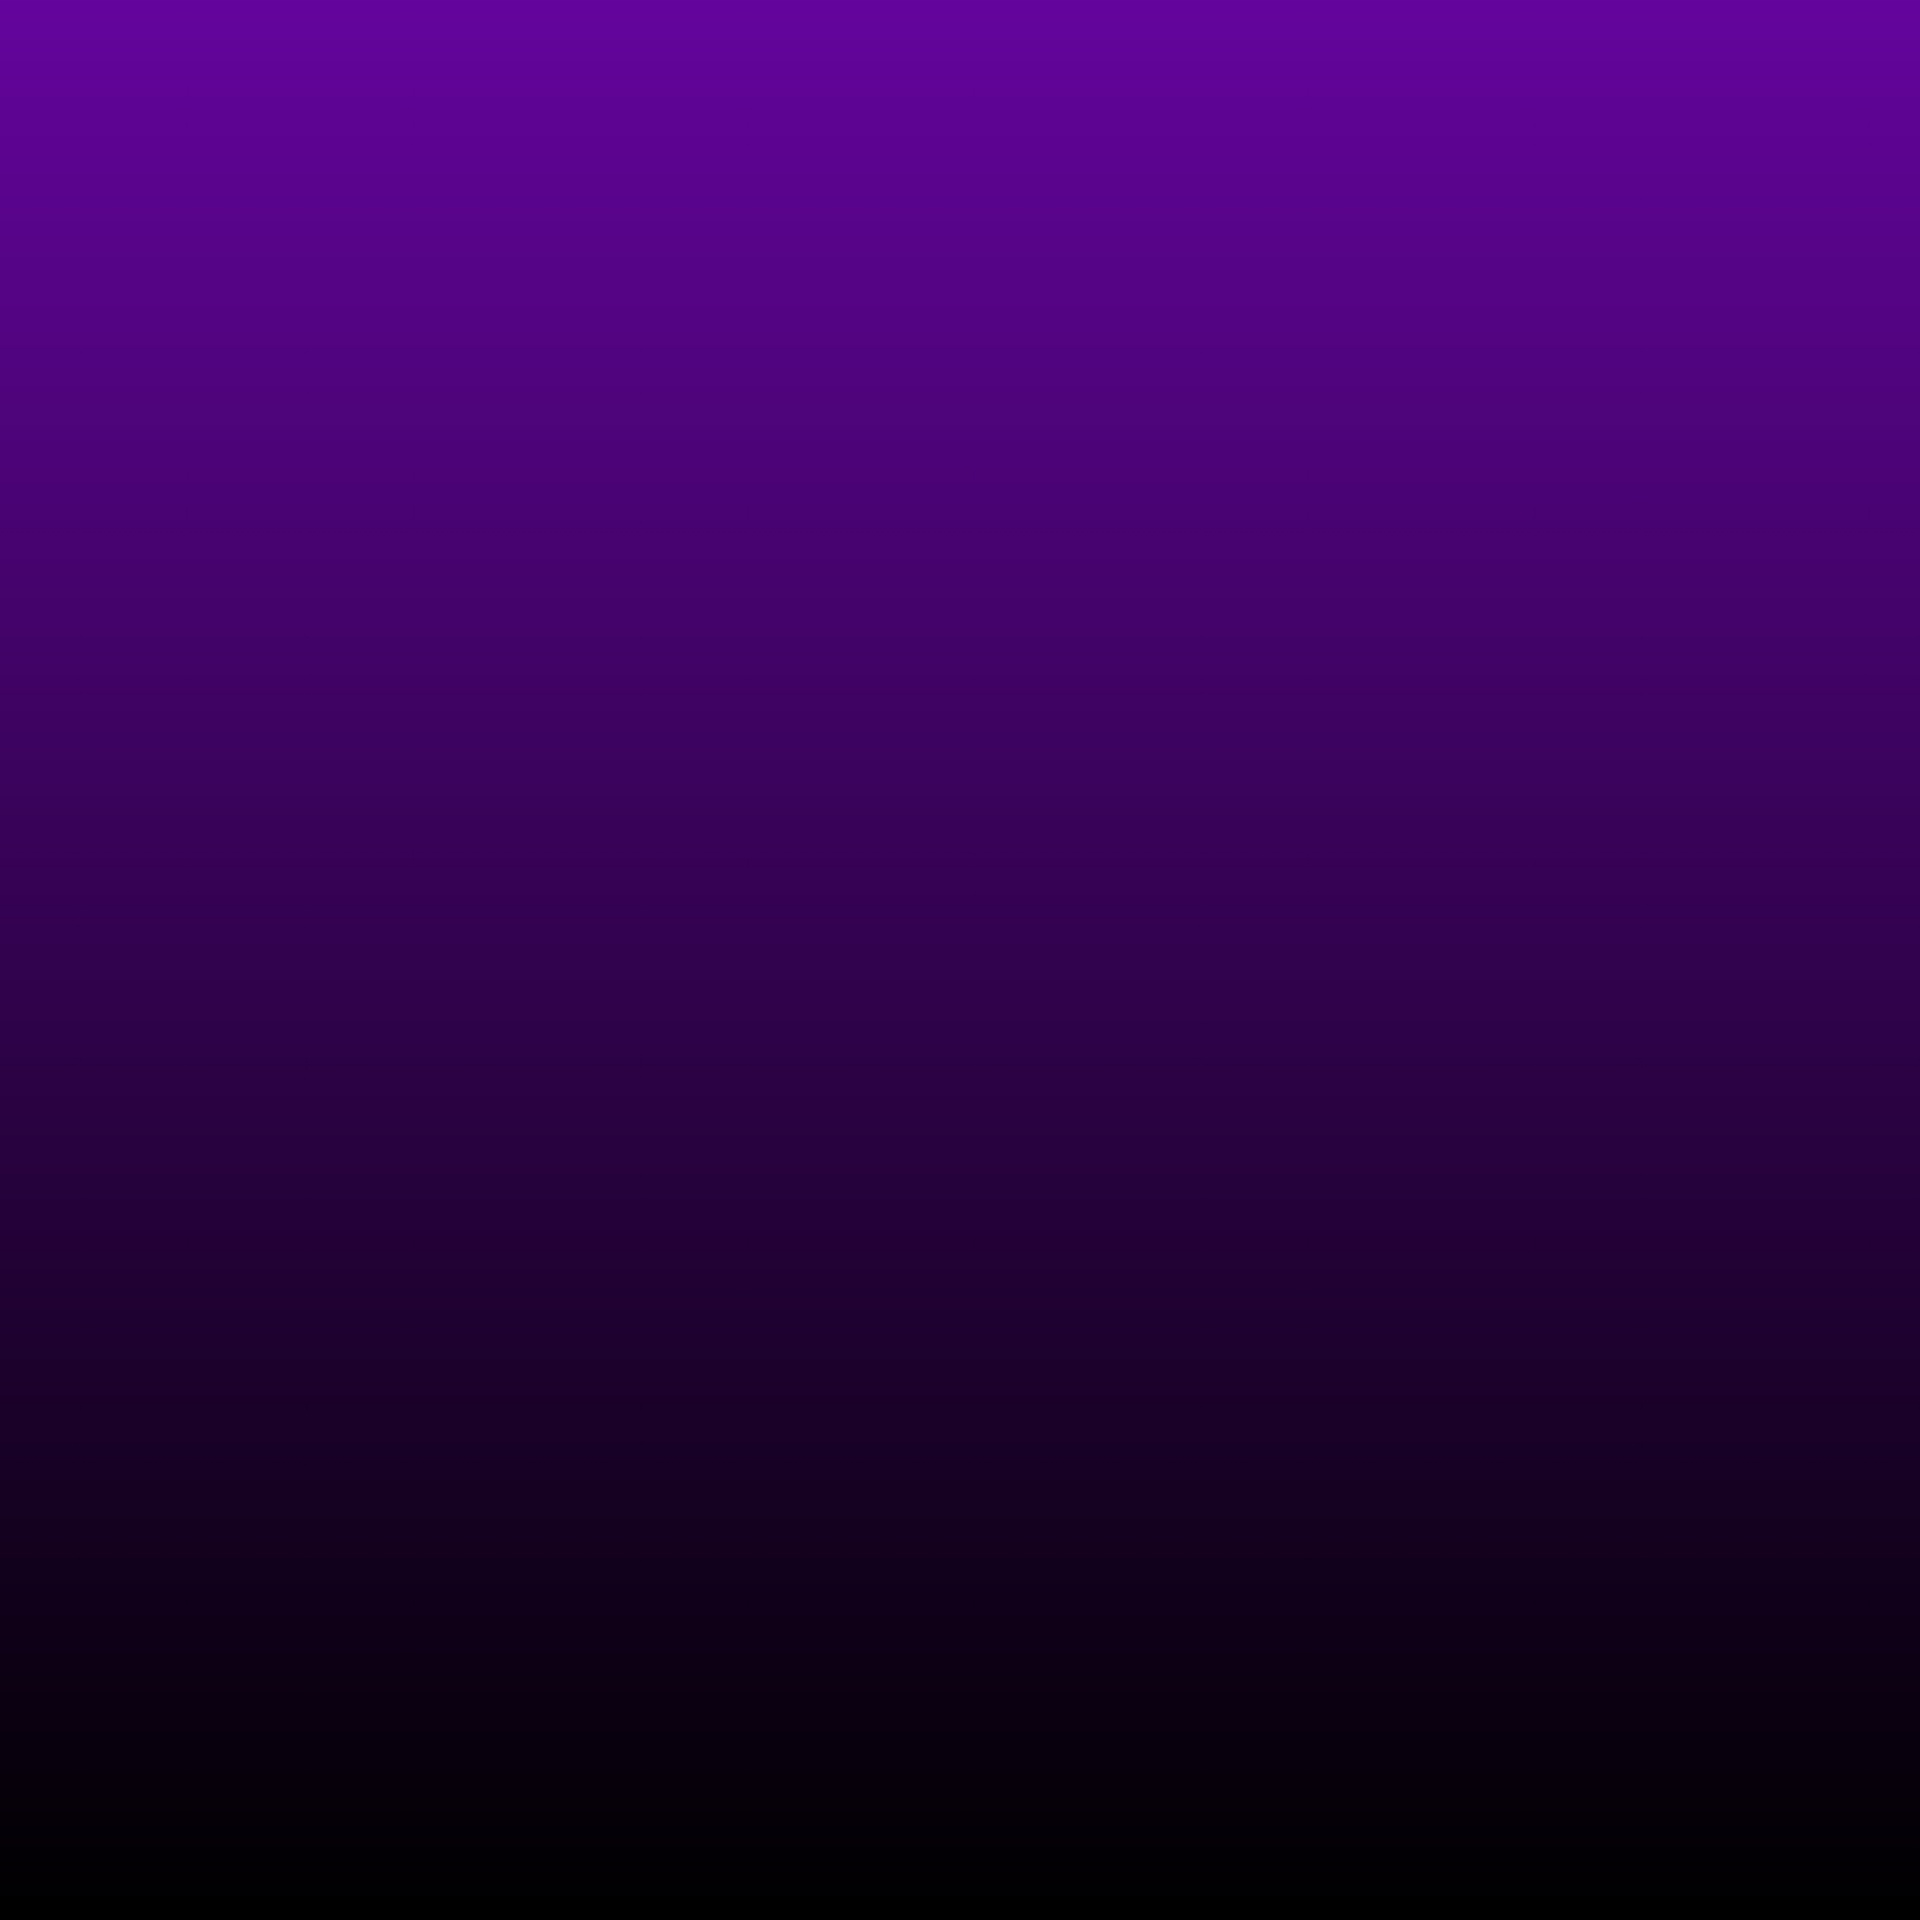 Black purple, a wallpaper I made by heavily blurring a picture :  r/iWallpaper